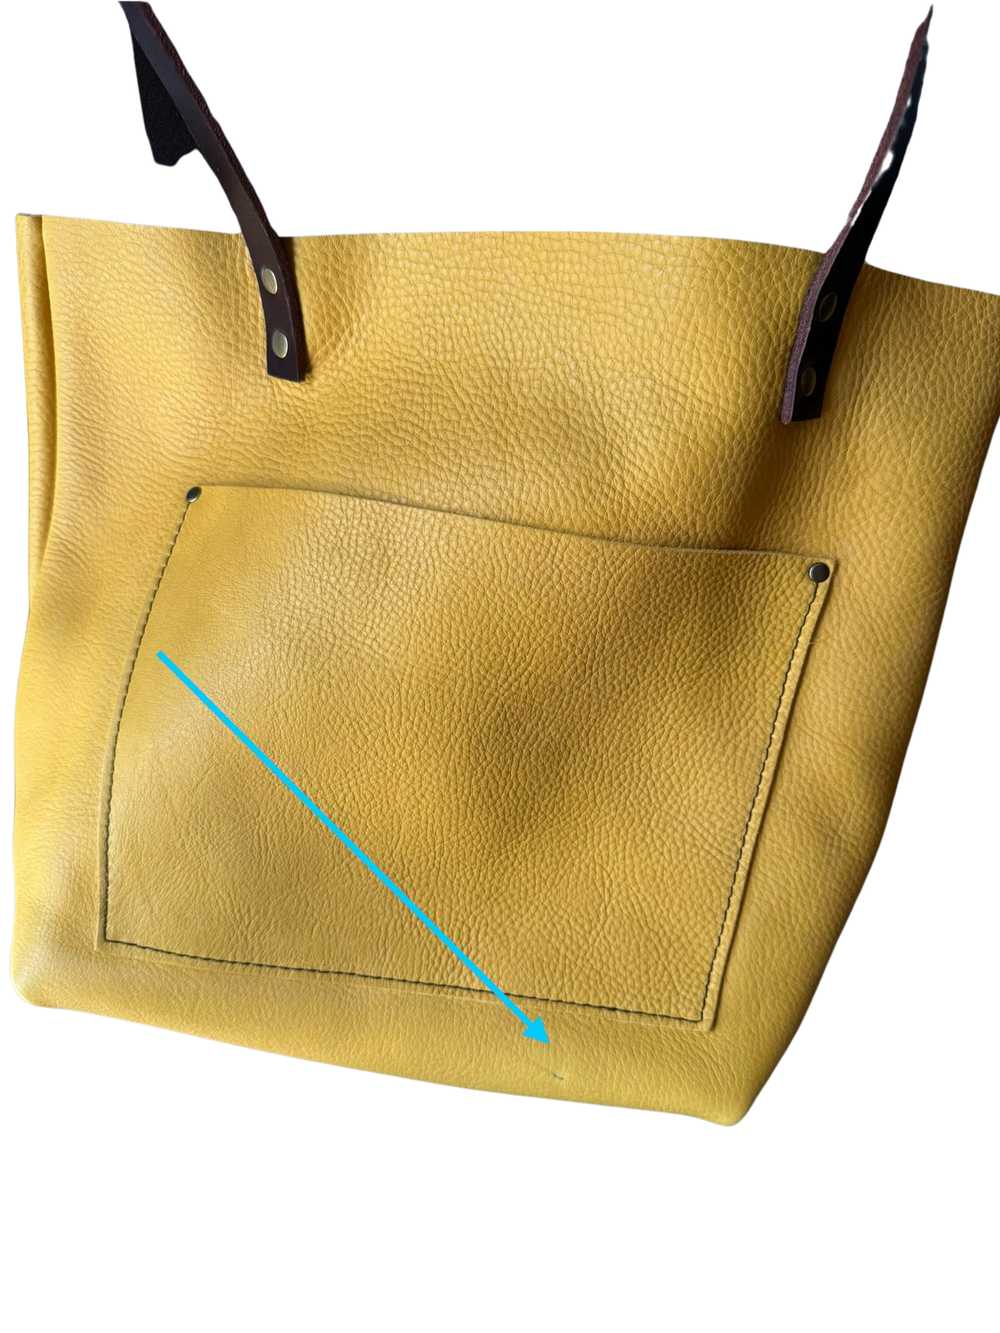 Portland Leather 'Almost Perfect' Leather Tote Bag - image 2